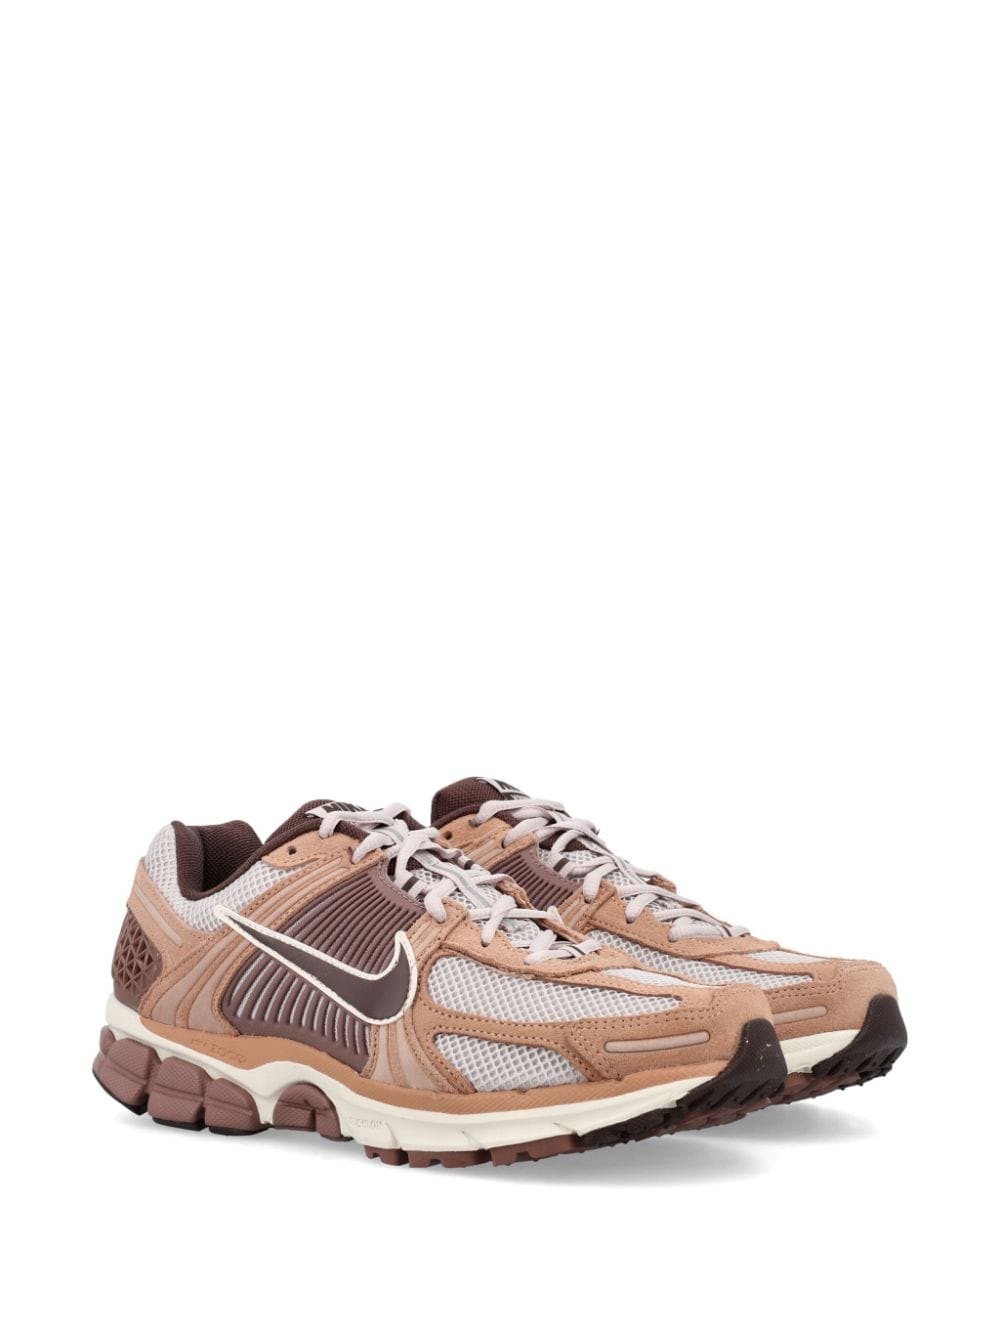 Nike Air Zoom Vomero 5 "Dusted Clay" - Bruin